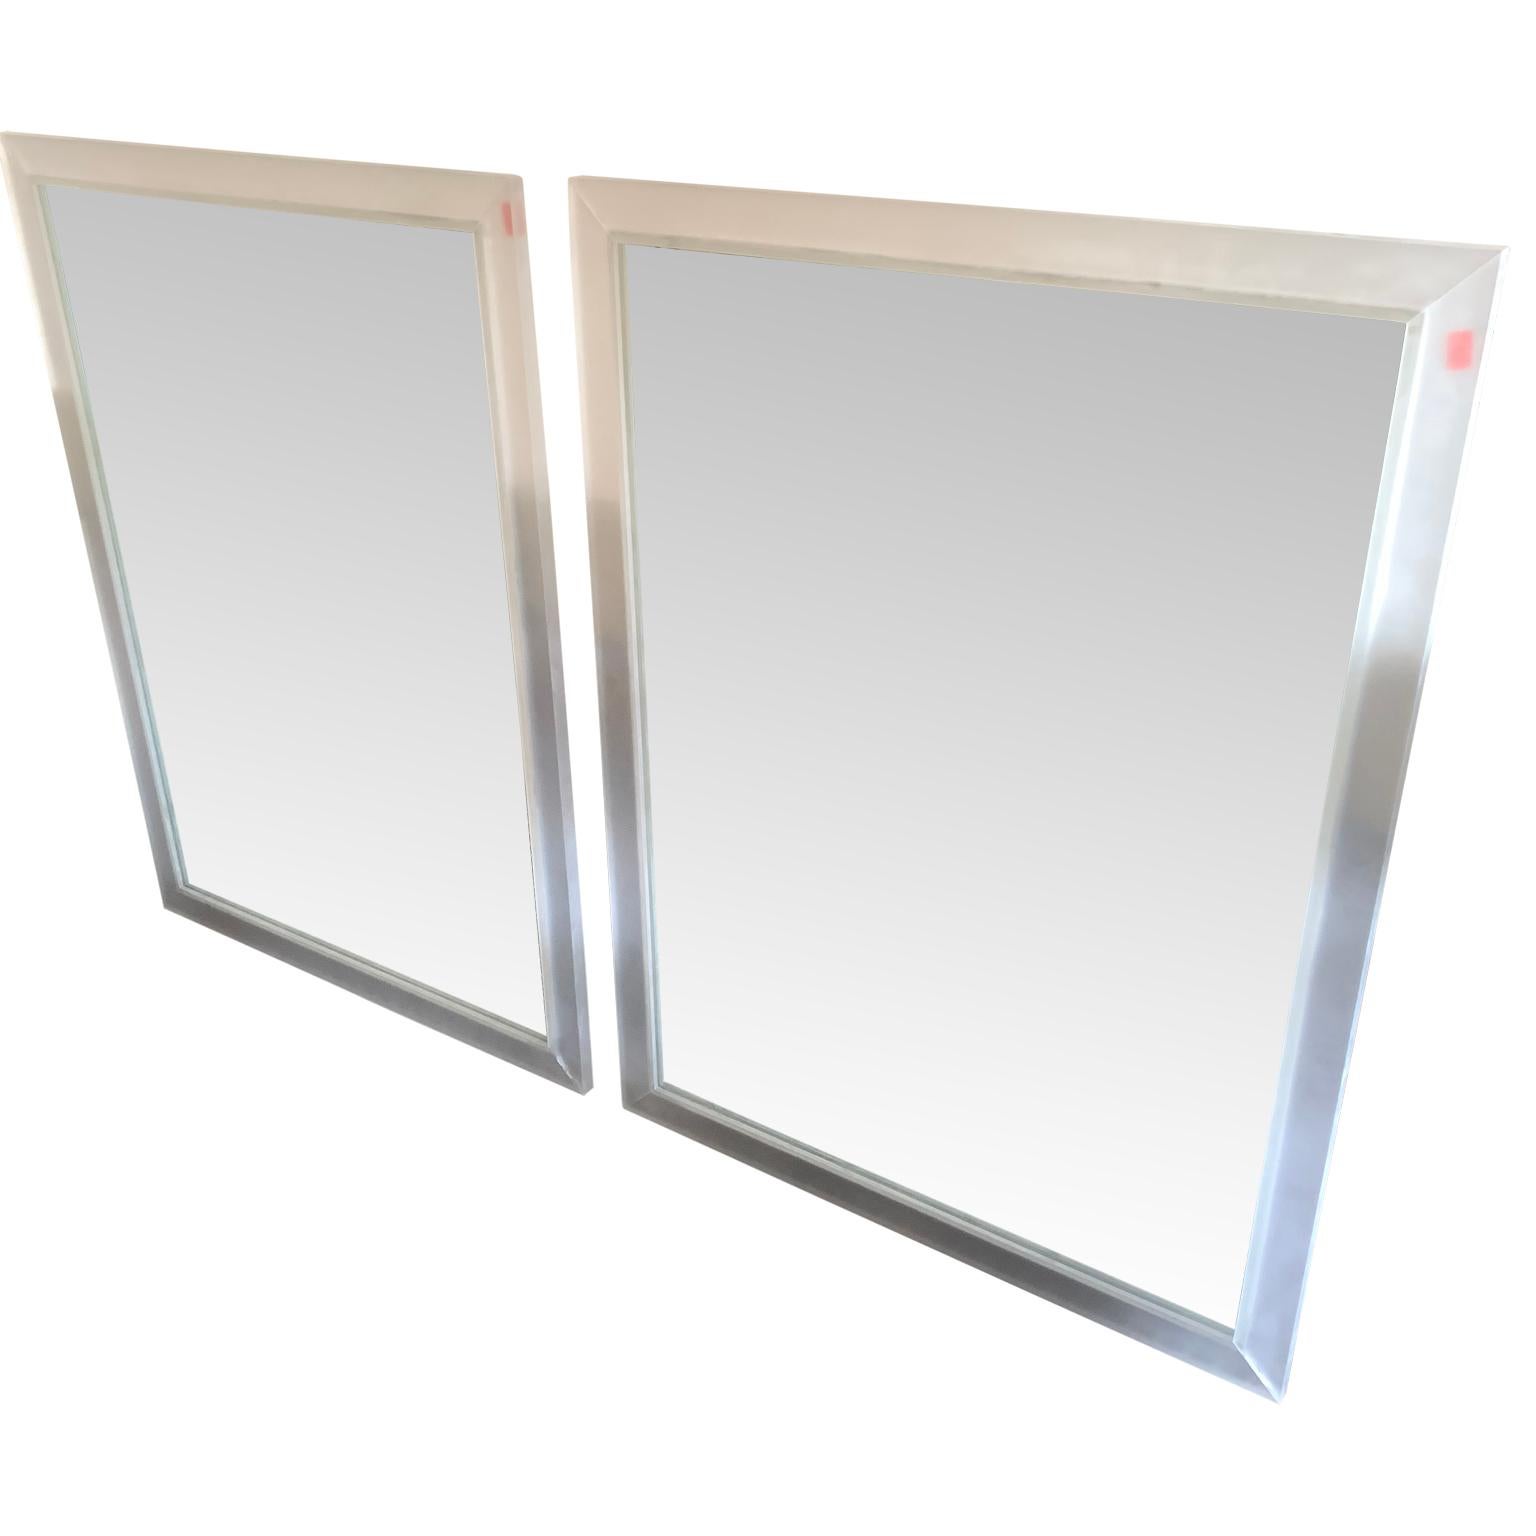 Set of Two Rectangular Vintage Frosted Translucent Lucite Wall Mirrors 8